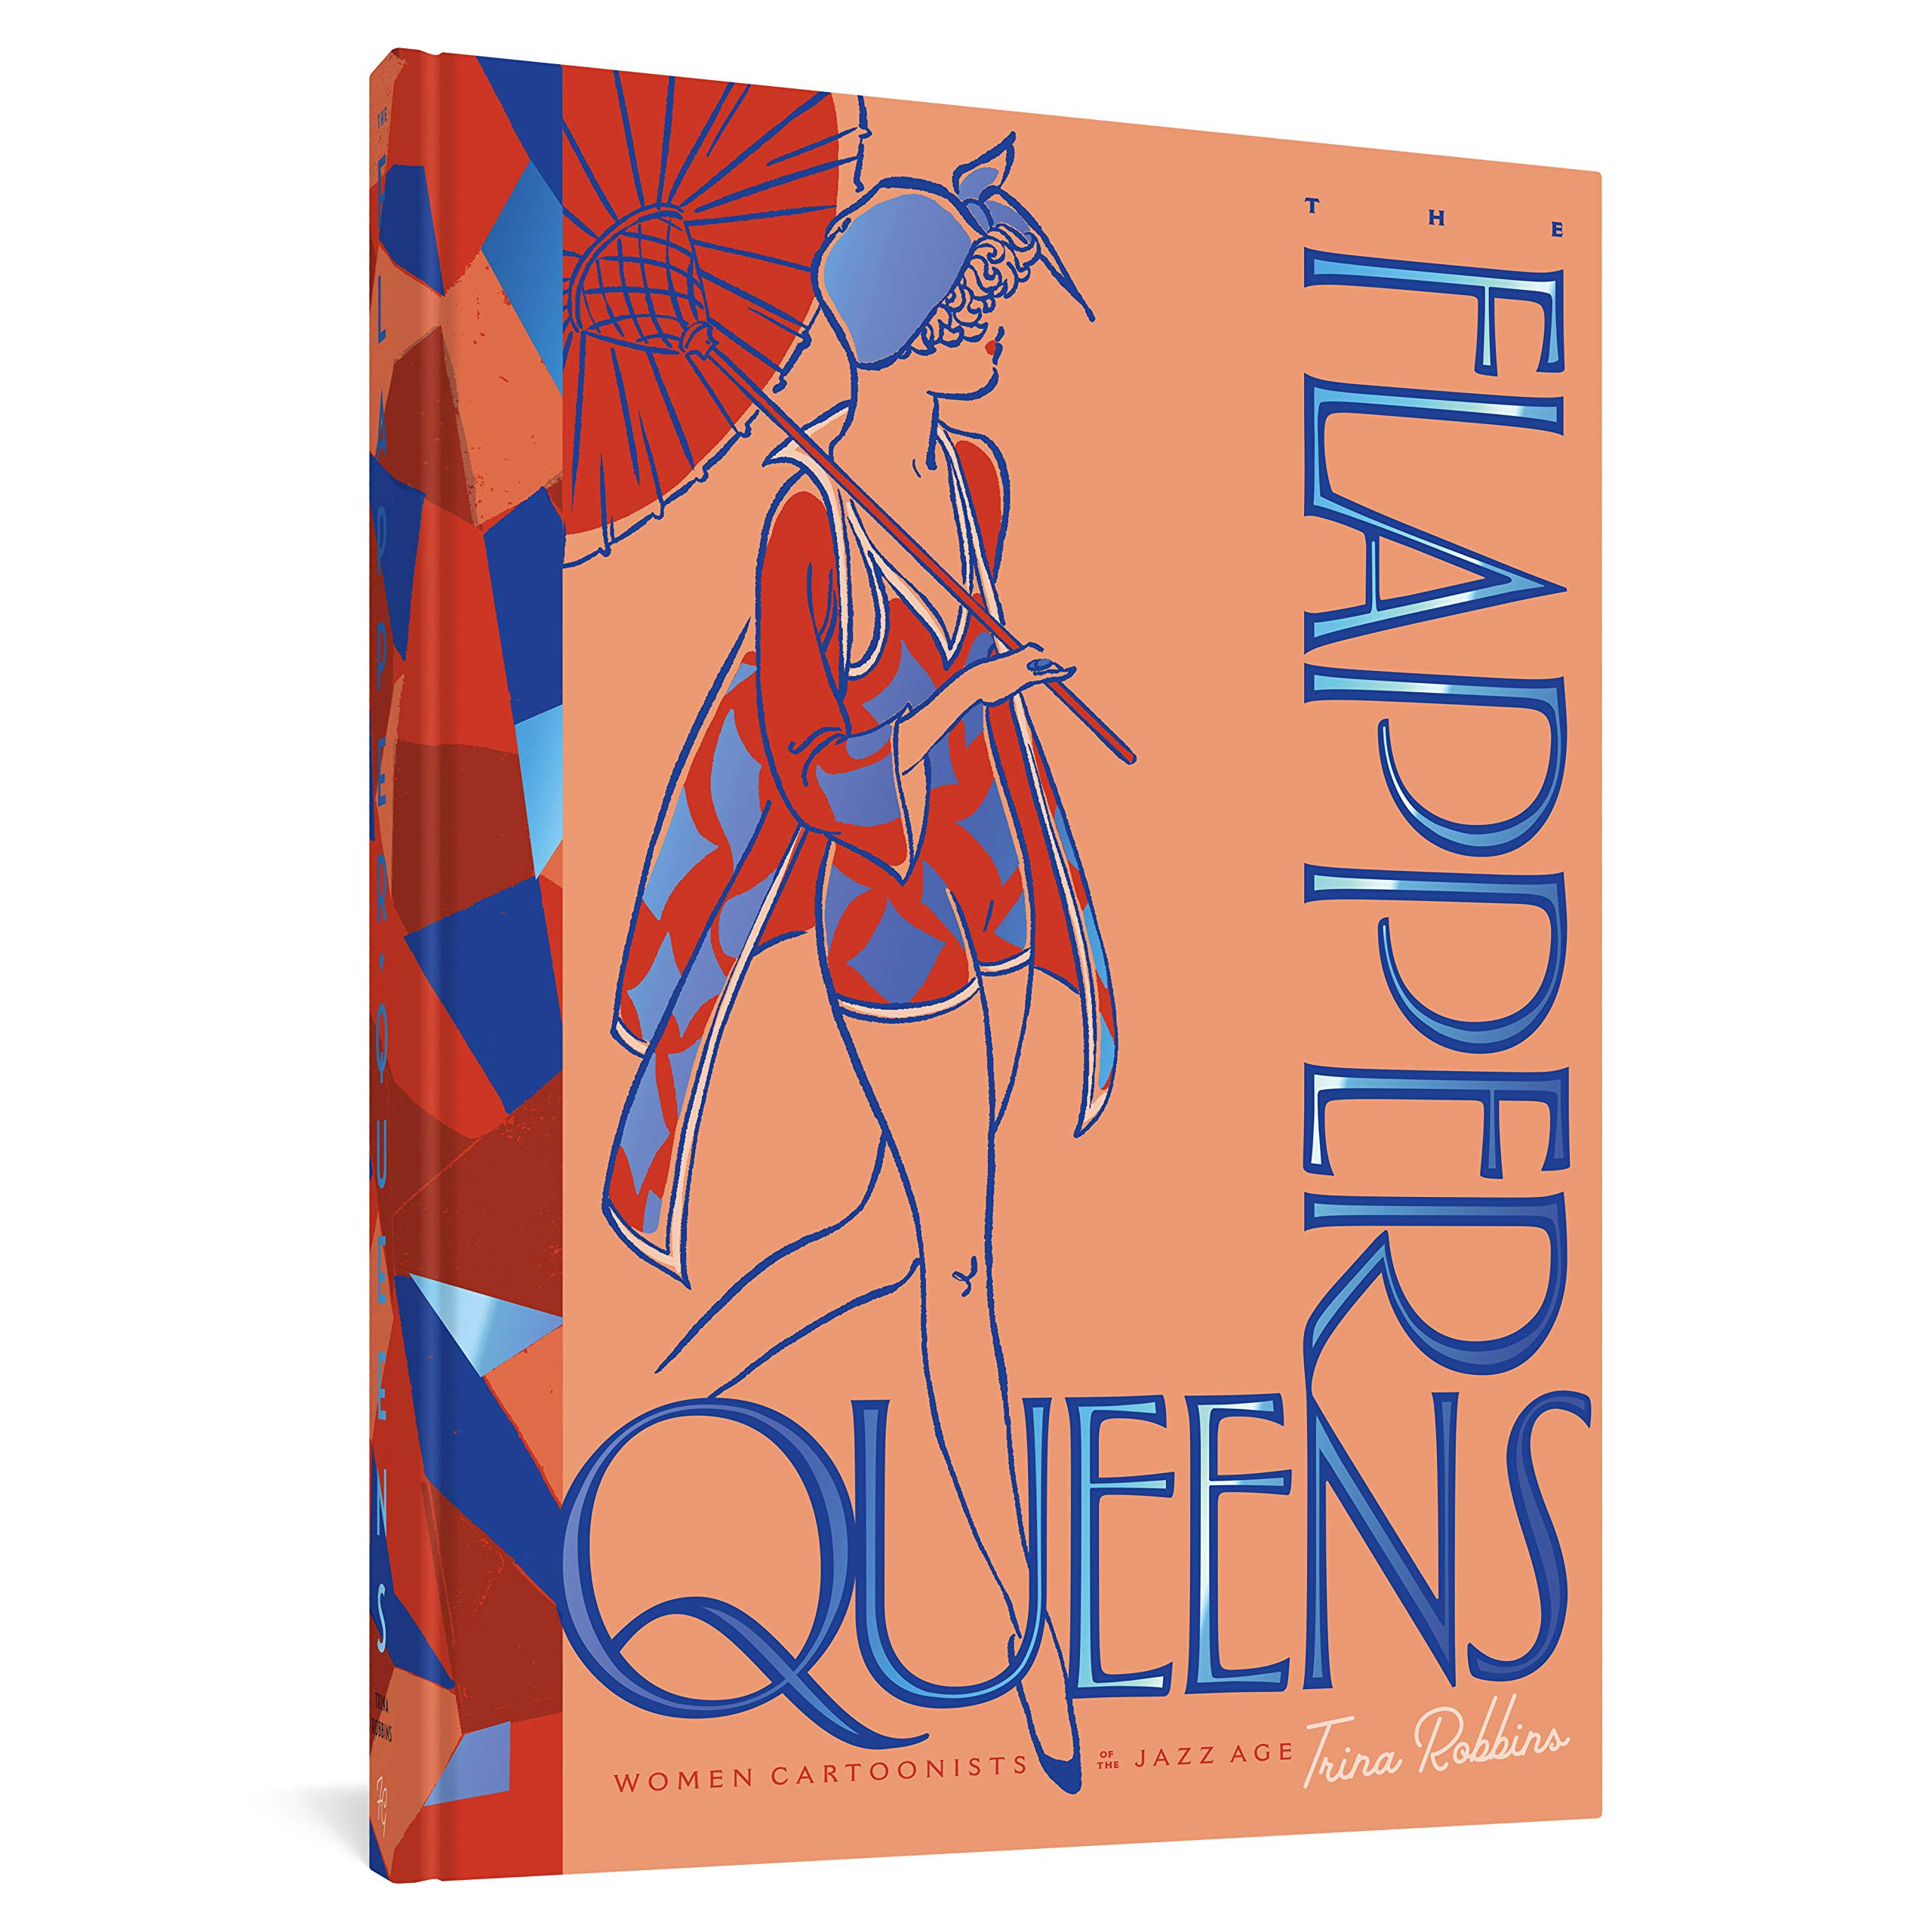 The Flapper Queens - Women Cartoonists of the Jazz Age